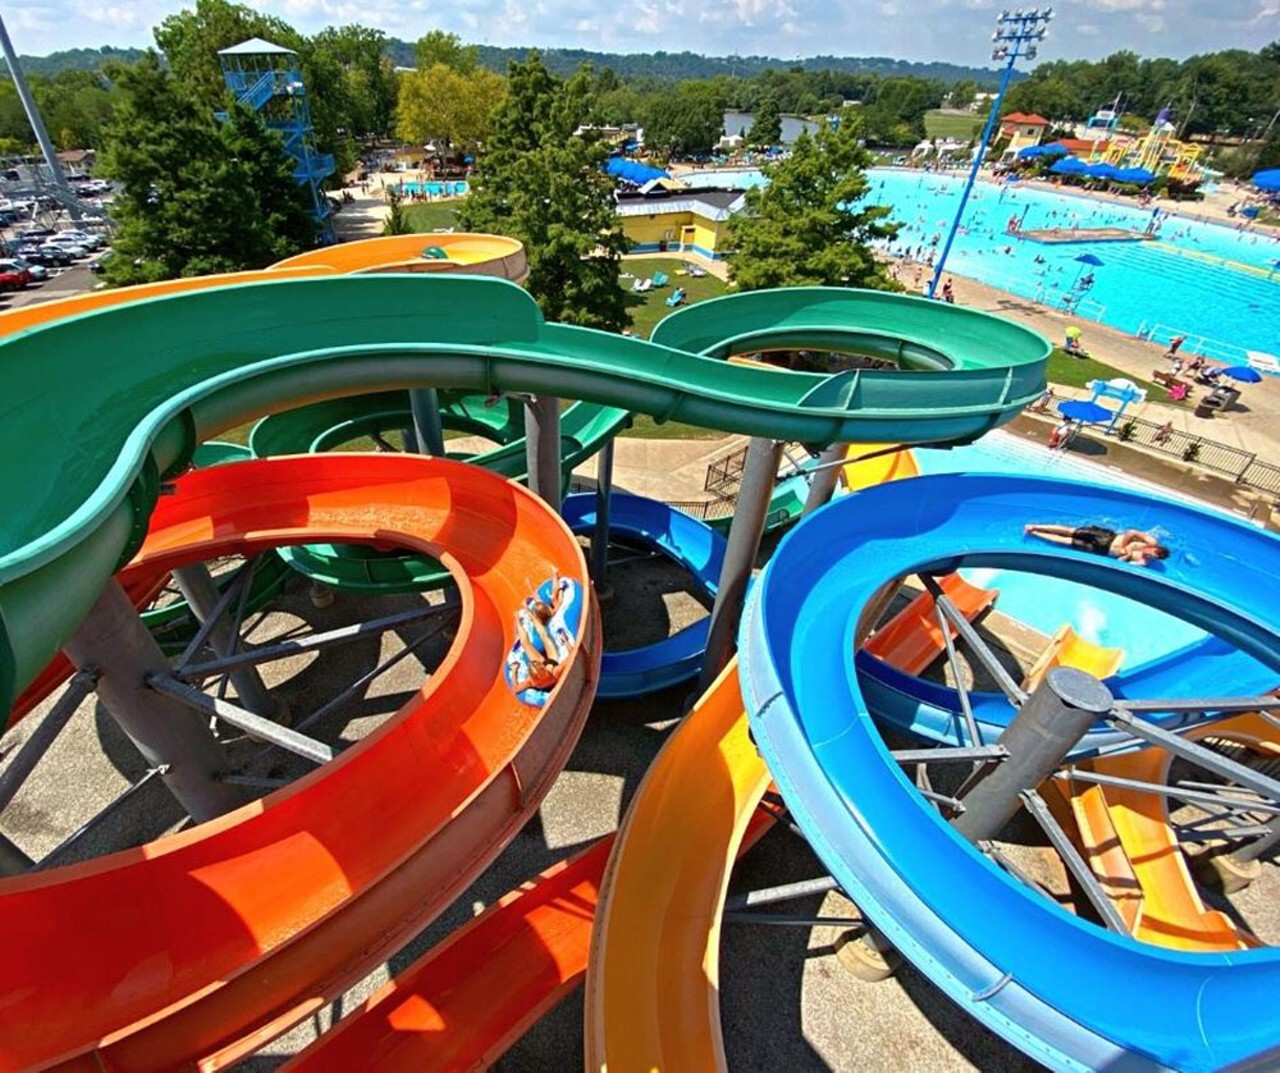 Make a Splash at Coney Island
6201 Kellogg Ave., Anderson Township
At Coney Island, you can take a dip in Sunlite Pool, zip down the numerous waterslides or compete against friends and family in the Challenge Zone – the largest Aquaglide pool obstacle course in the country. There’s also tons of fun to be in Action Alley, which features a giant, inflatable obstacle course, inflatable axe-throwing and arts and crafts. You can also challenge each other on the mini-golf course or take a leisurely glide around Lake Como in the Storybook Paddle Boats.